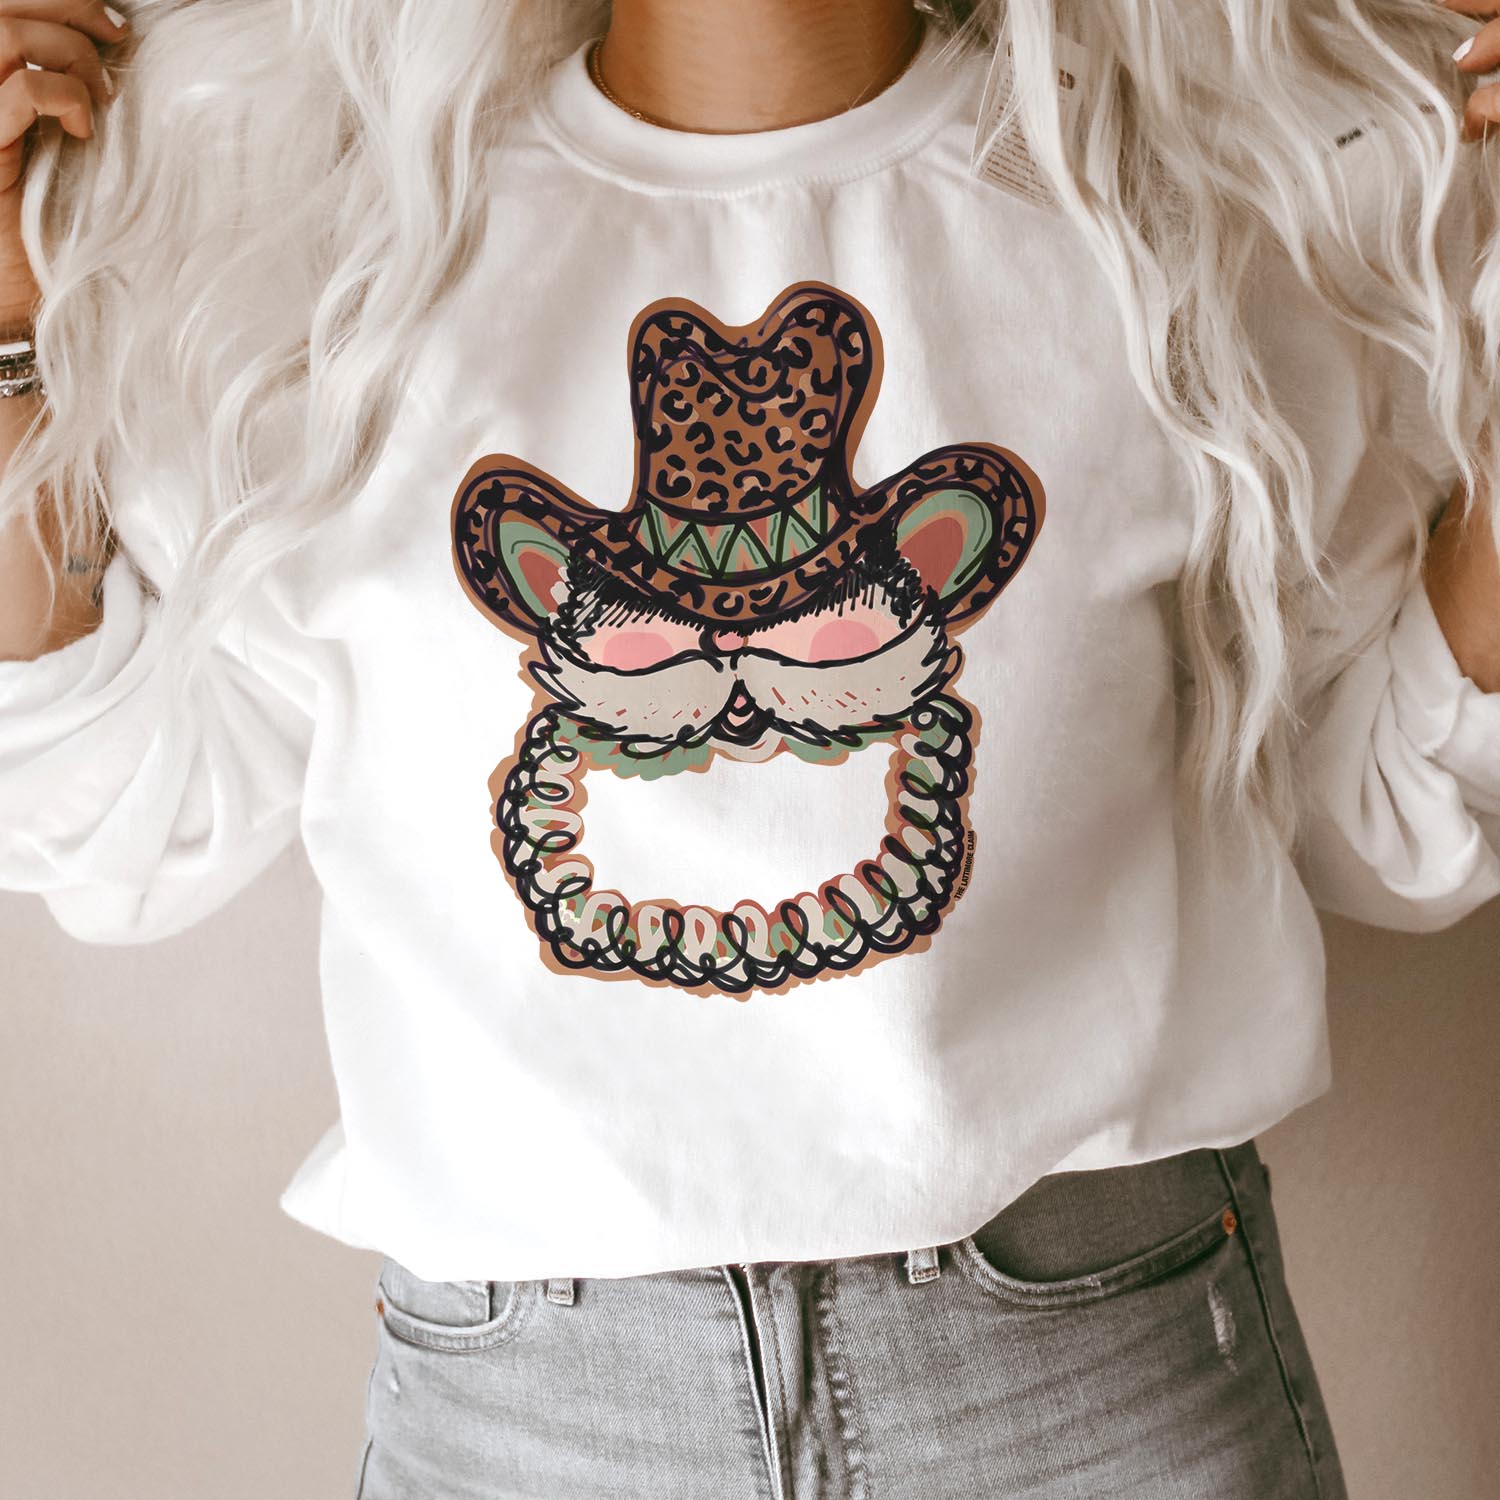 This white sweatshirt includes a crew neckline, long sleeves, and a Santa Clause graphic with a leopard print hat. The model has this sweatshirt styled with rolled sleeves and light wash denim jeans. 